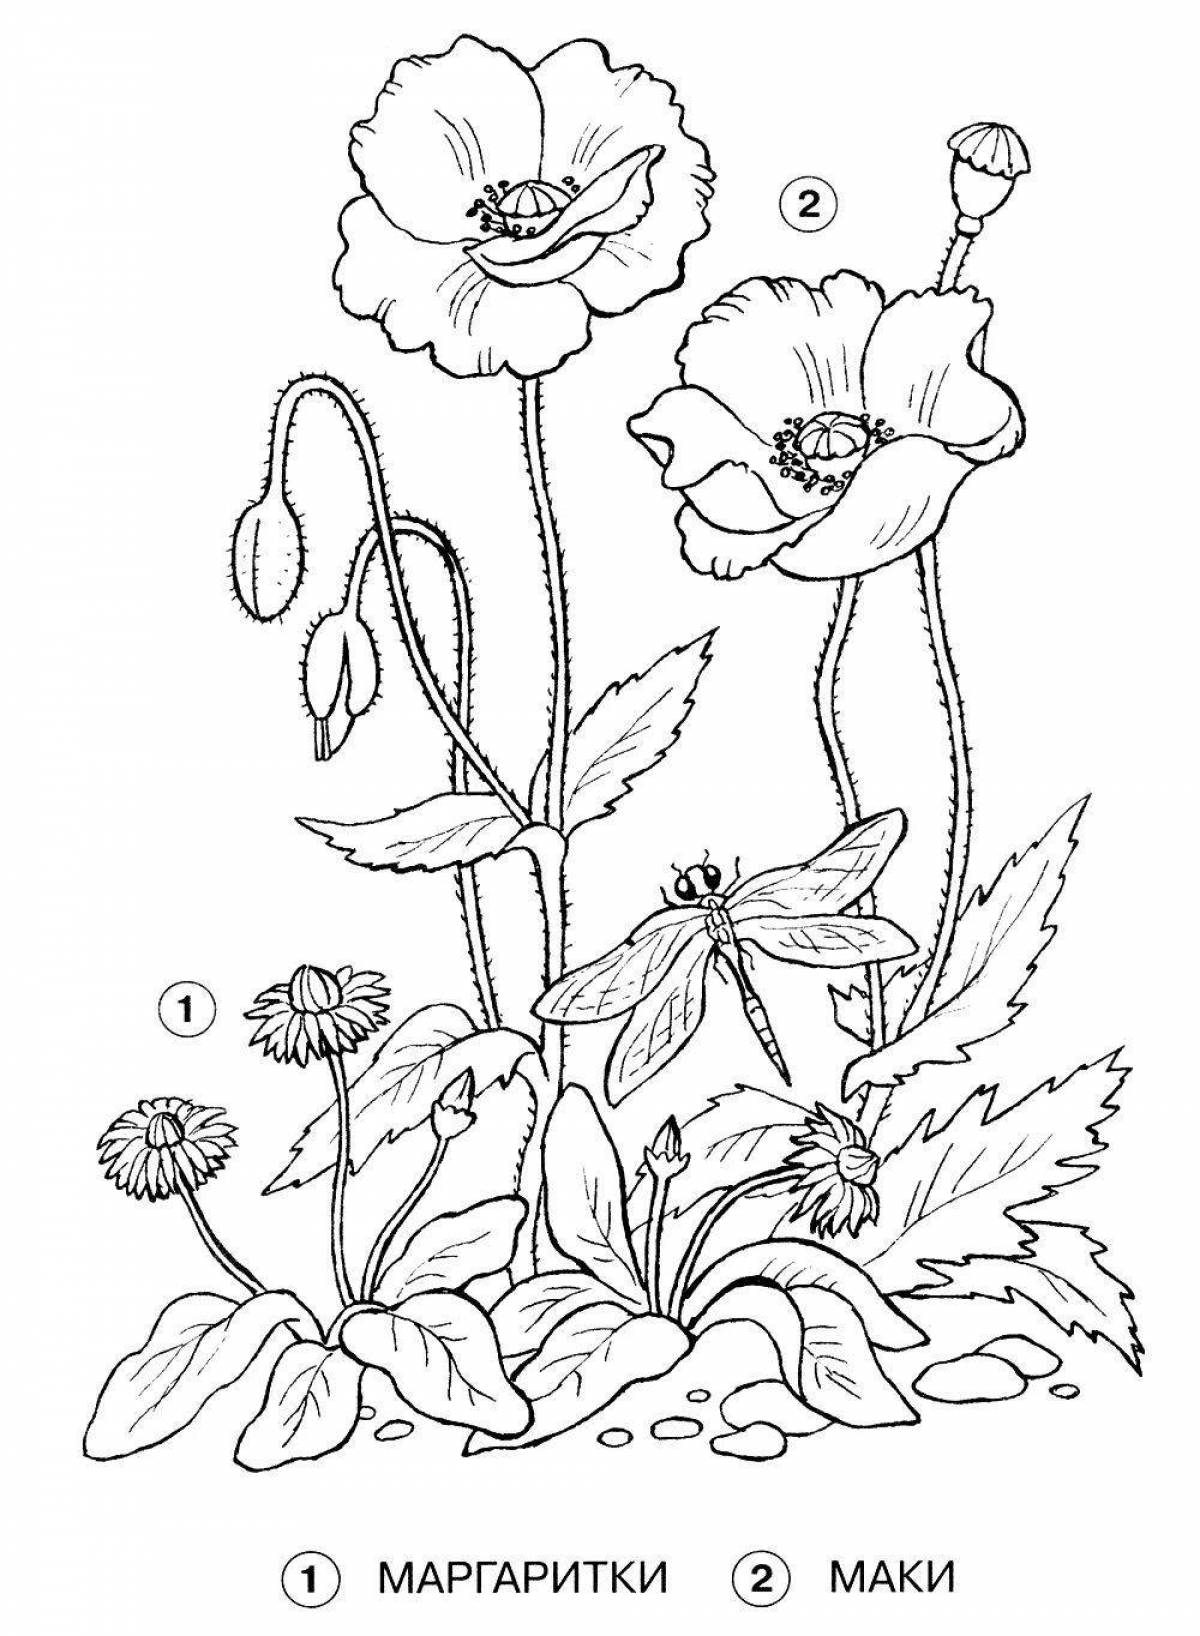 Colourful garden flowers coloring book